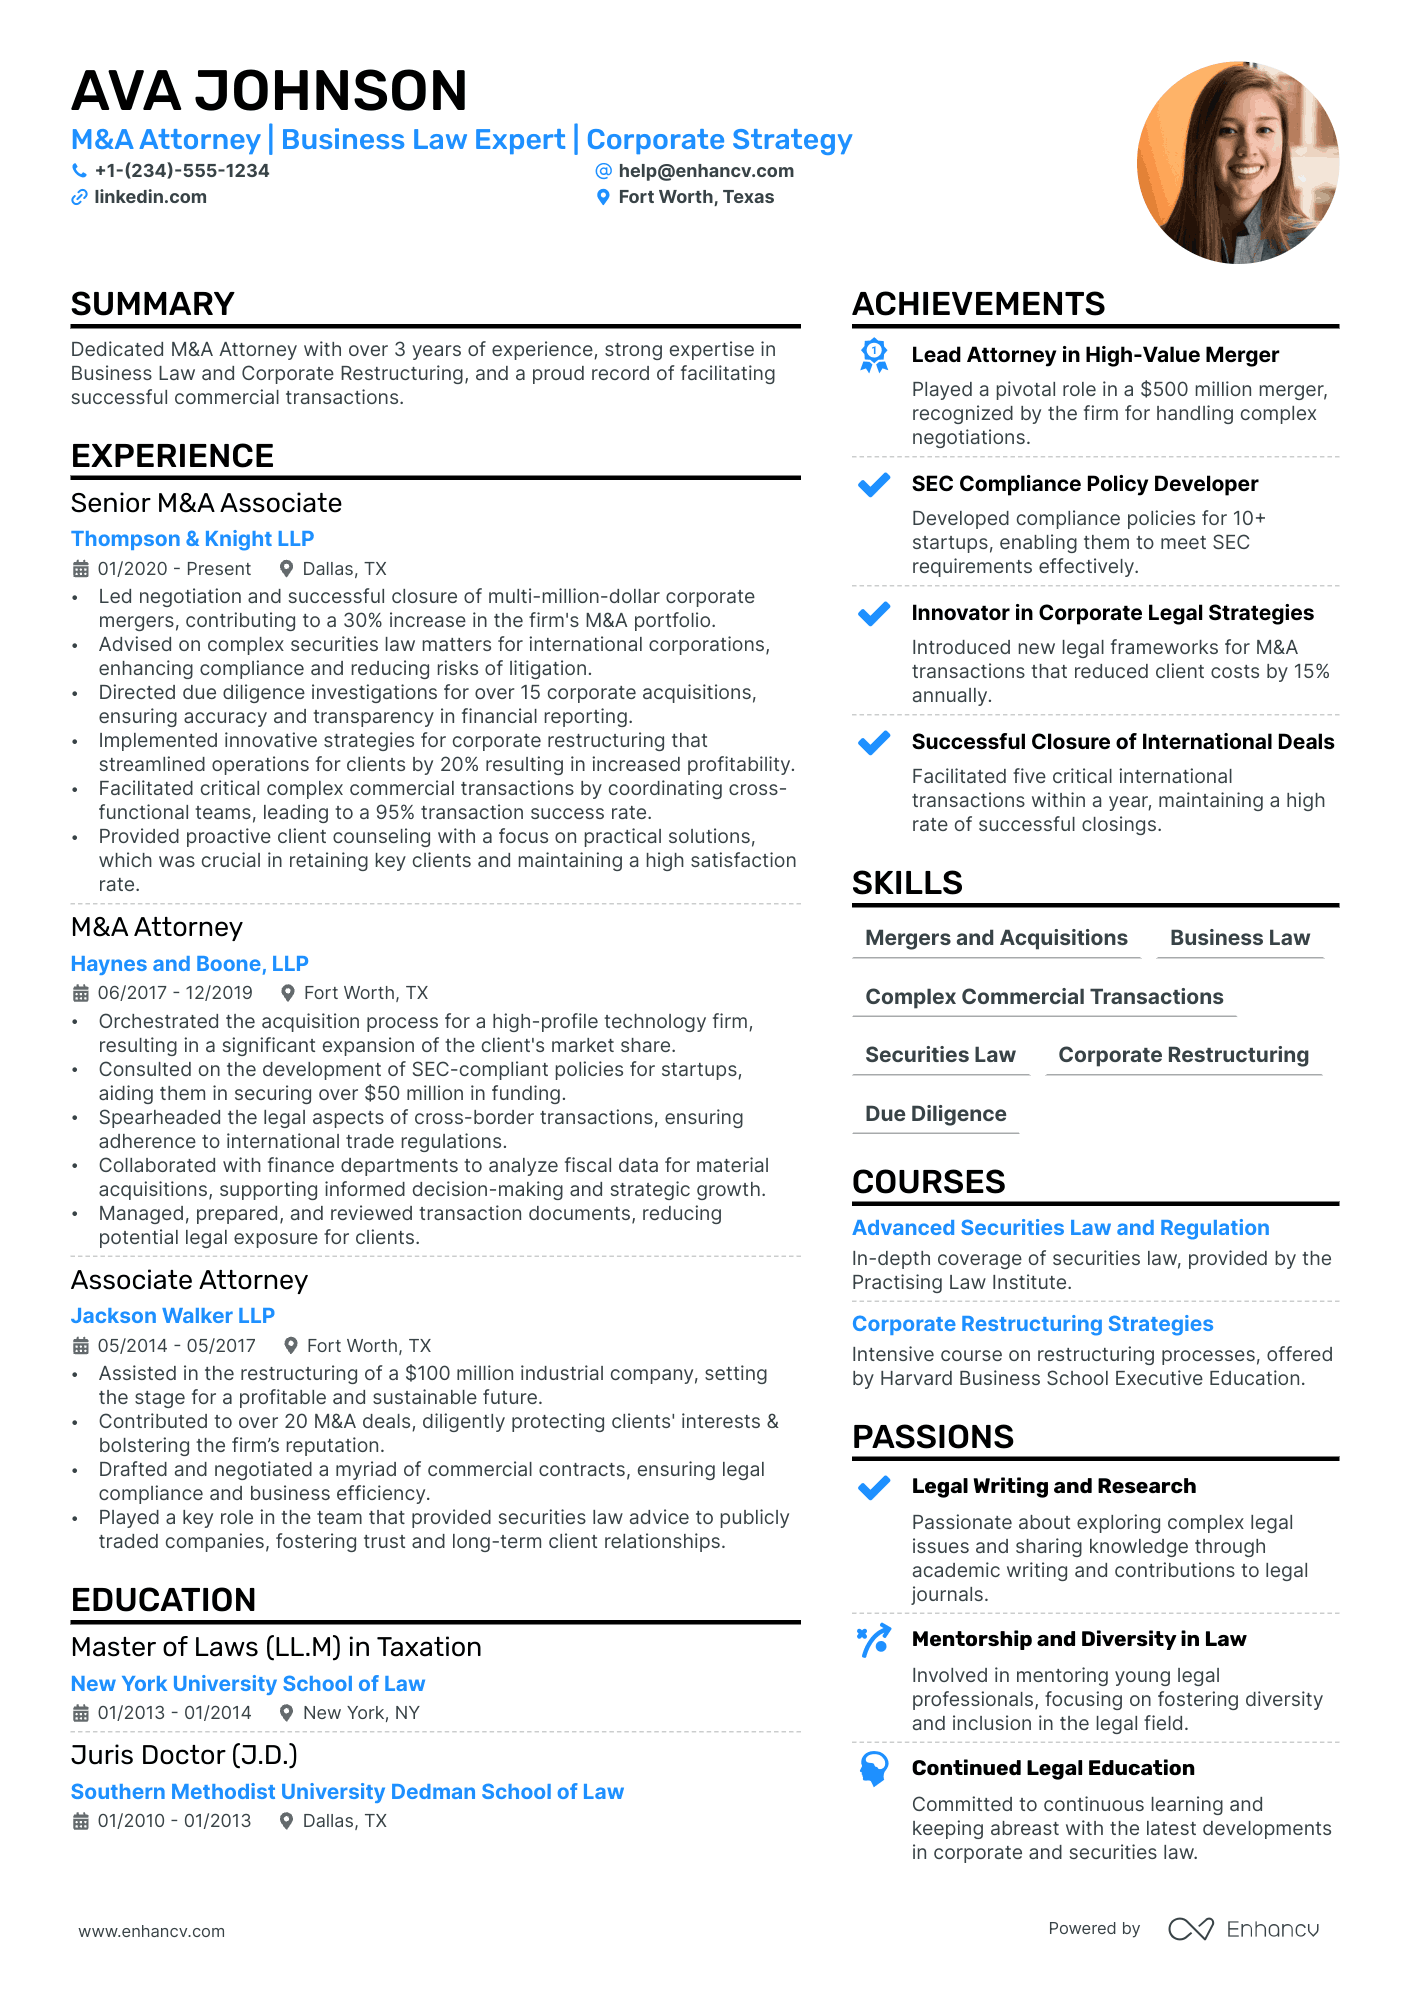 M&A Lawyer resume example